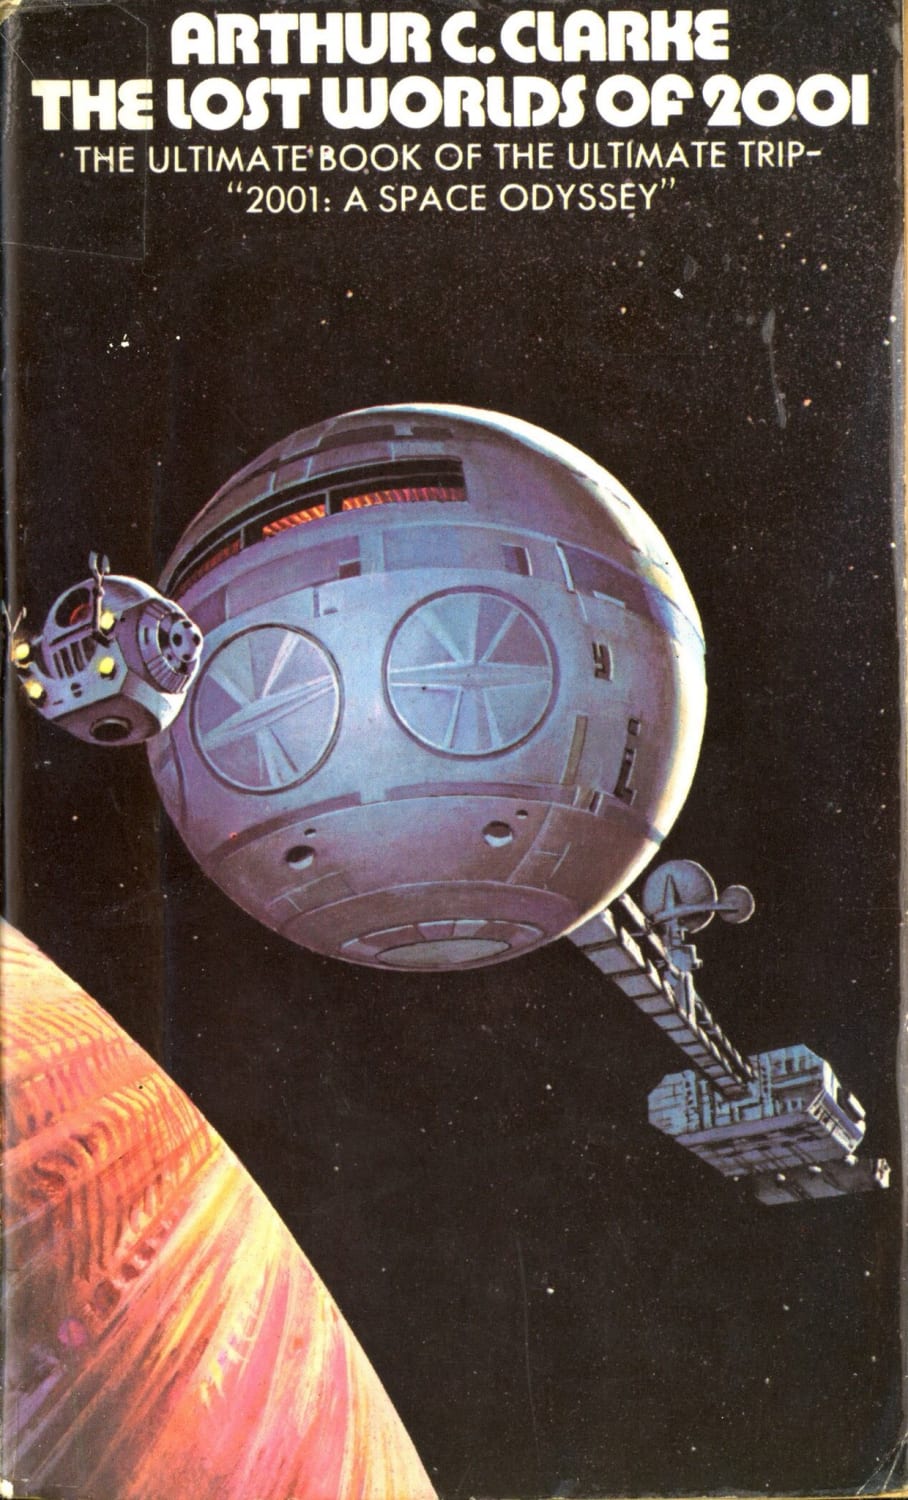 Arthur C. Clarke’s account of the writing of 2001 A Space Odyssey and his interactions with Stanley Kubrick. Art by Bruce Pennington (1972)